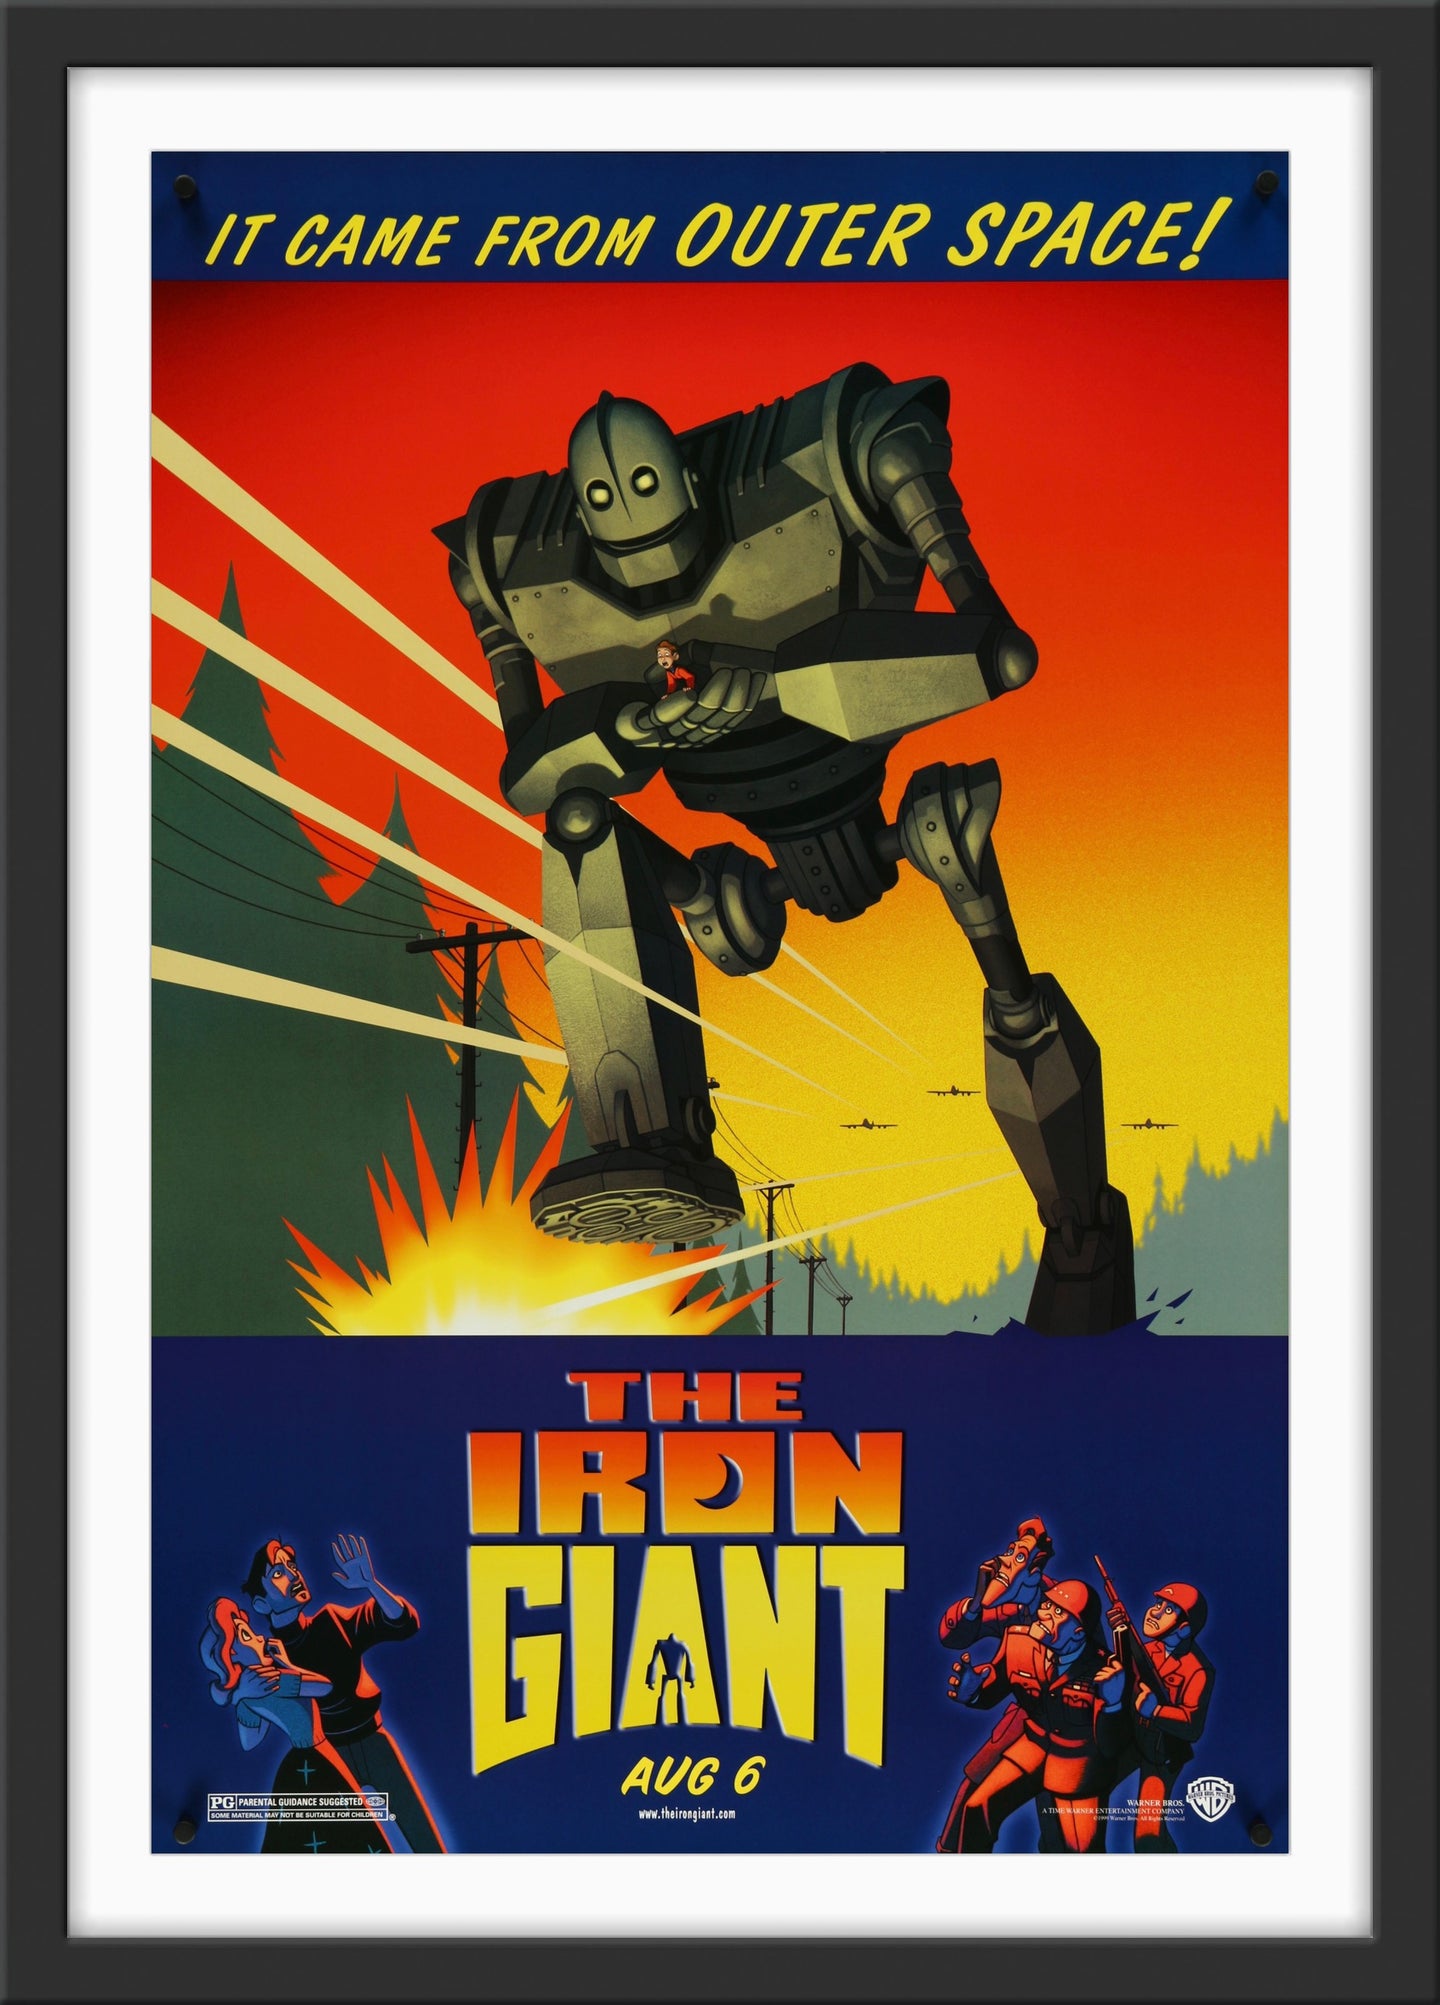 An original movie poster for the animated film The Iron Giant